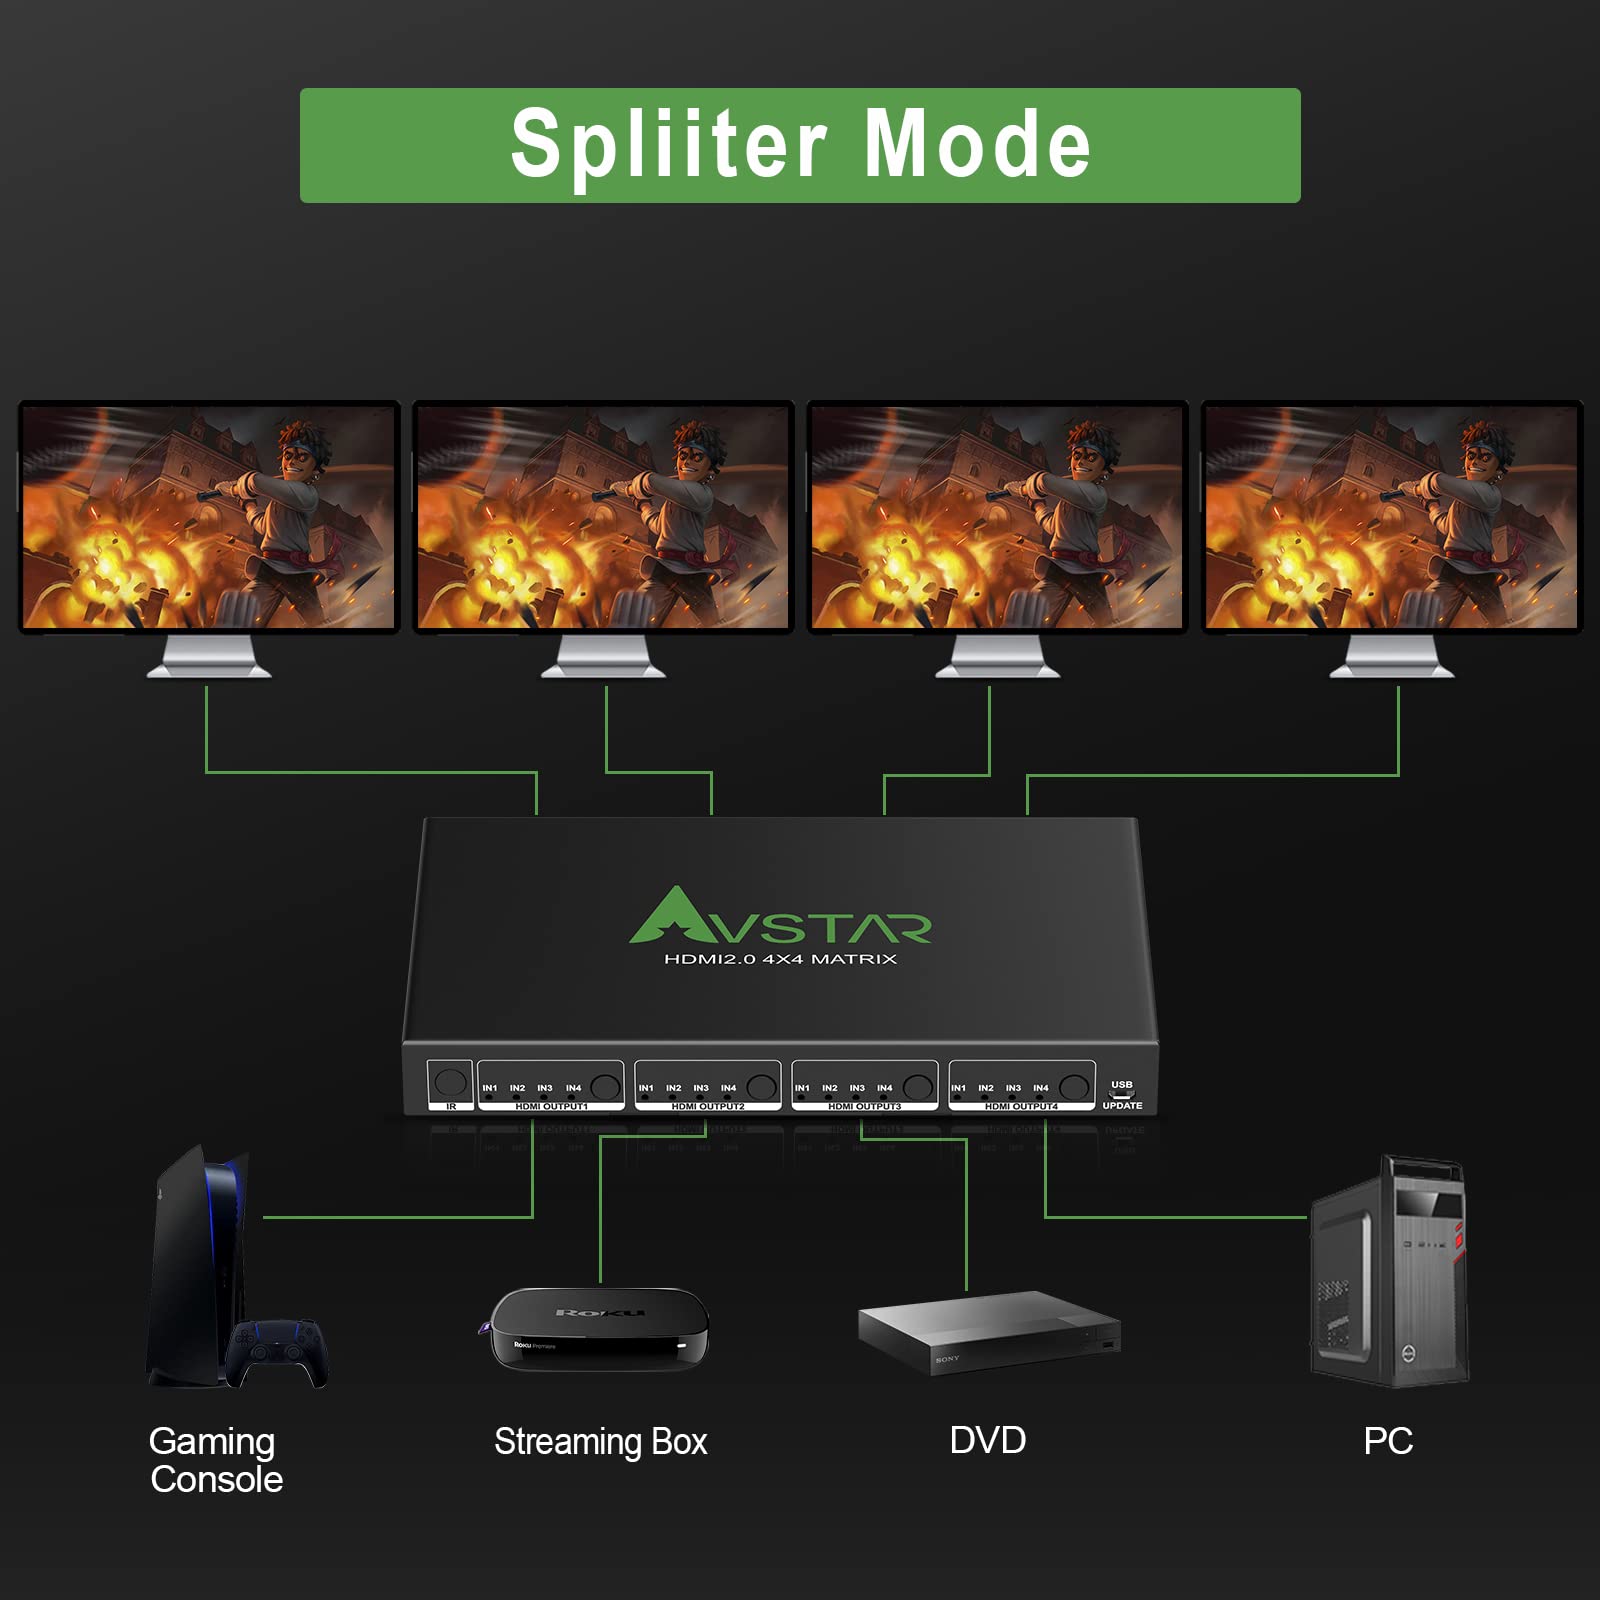 4K 60Hz HDMI Matrix Switch 4x4,HDMI 2.0 Matrix Switcher Splitter 4 in 4 Out with coaxial SPDIF Audio 5.1CH, 4K@60Hz 4:4:4 8bit HDR HDCP 2.2,Down Scaler to 1080P,Button,IR Remote,RS232,IP Control